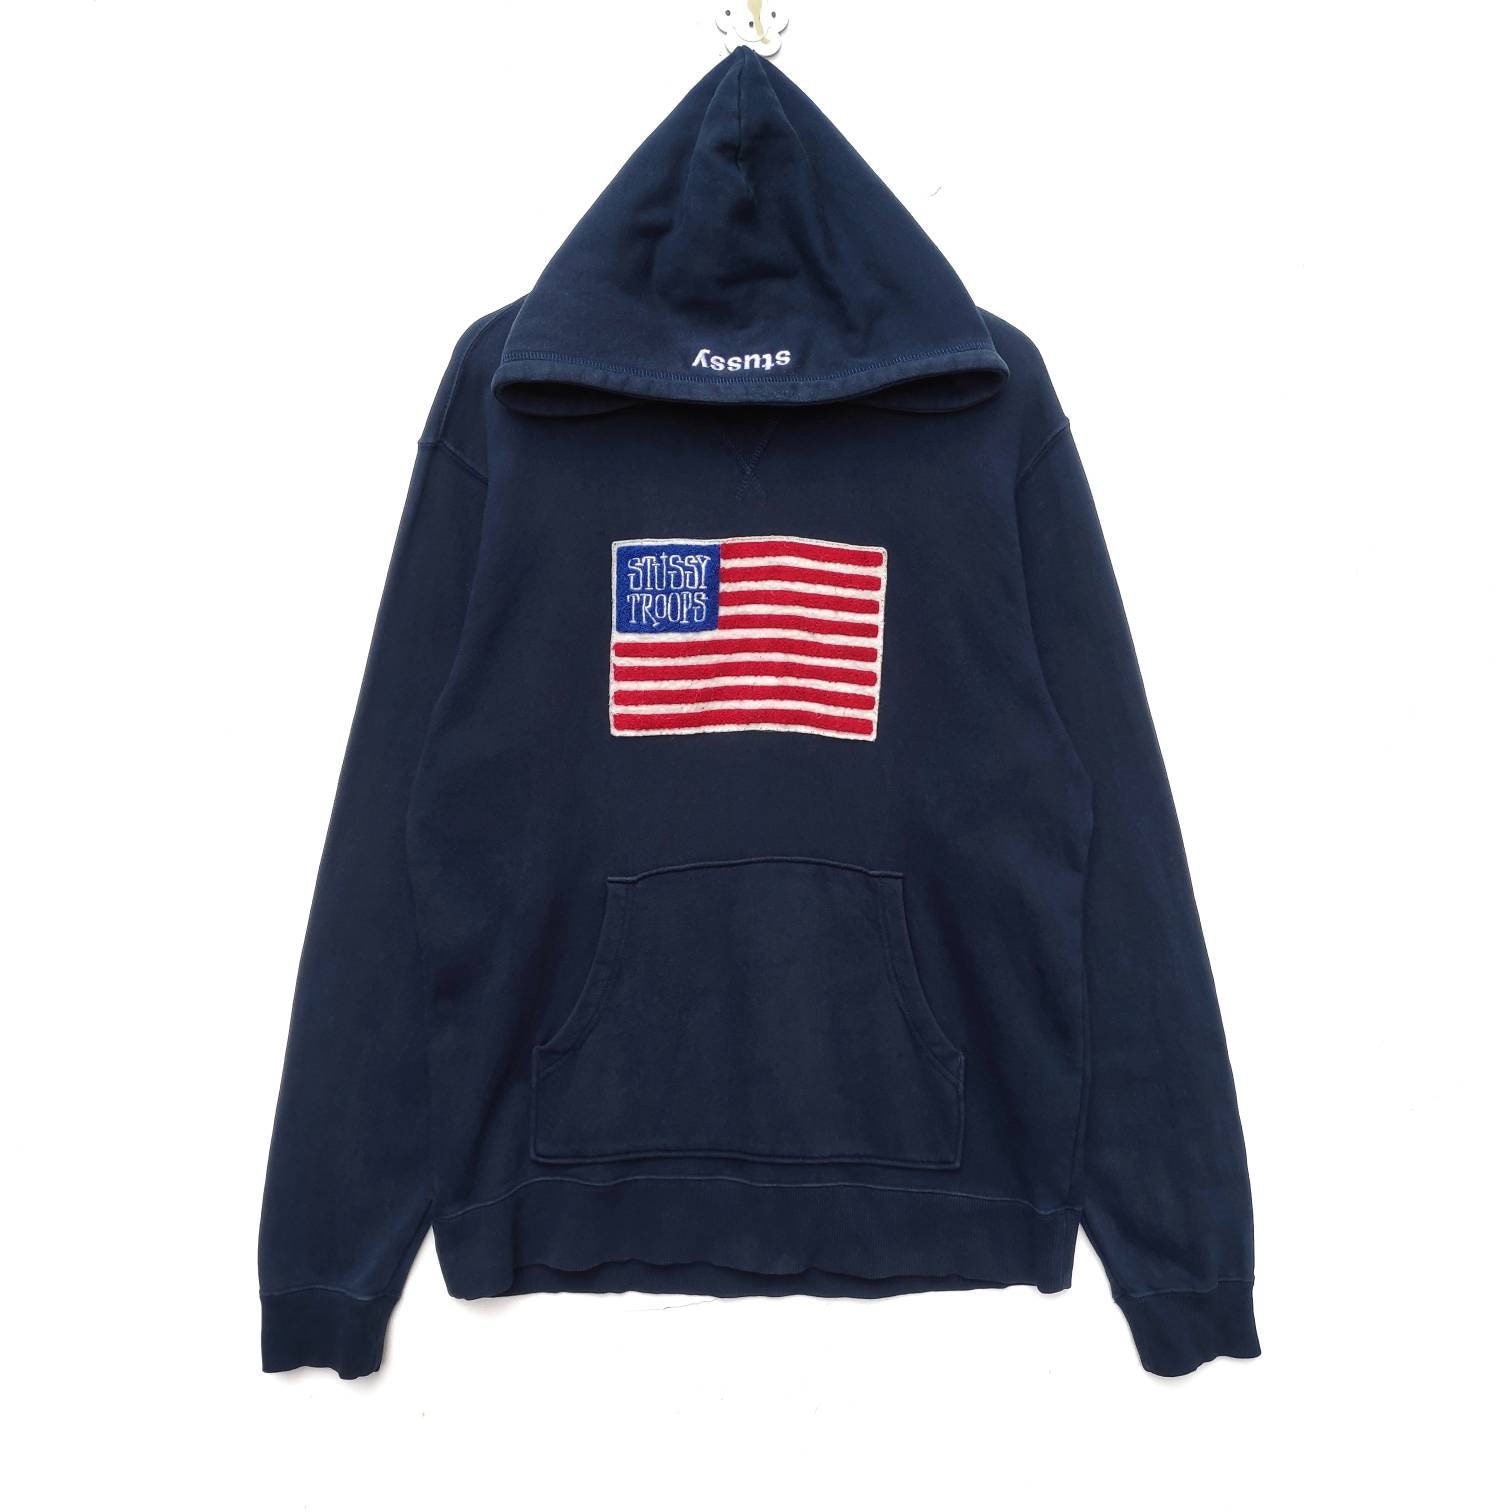 STUSSY Troops Authentic Hoodie  Sweatshirt Sweater Pullover Hip Hop Swag Rap Tee Shirt XL Size Dope Streetwear Pile Lined USA Flag Design